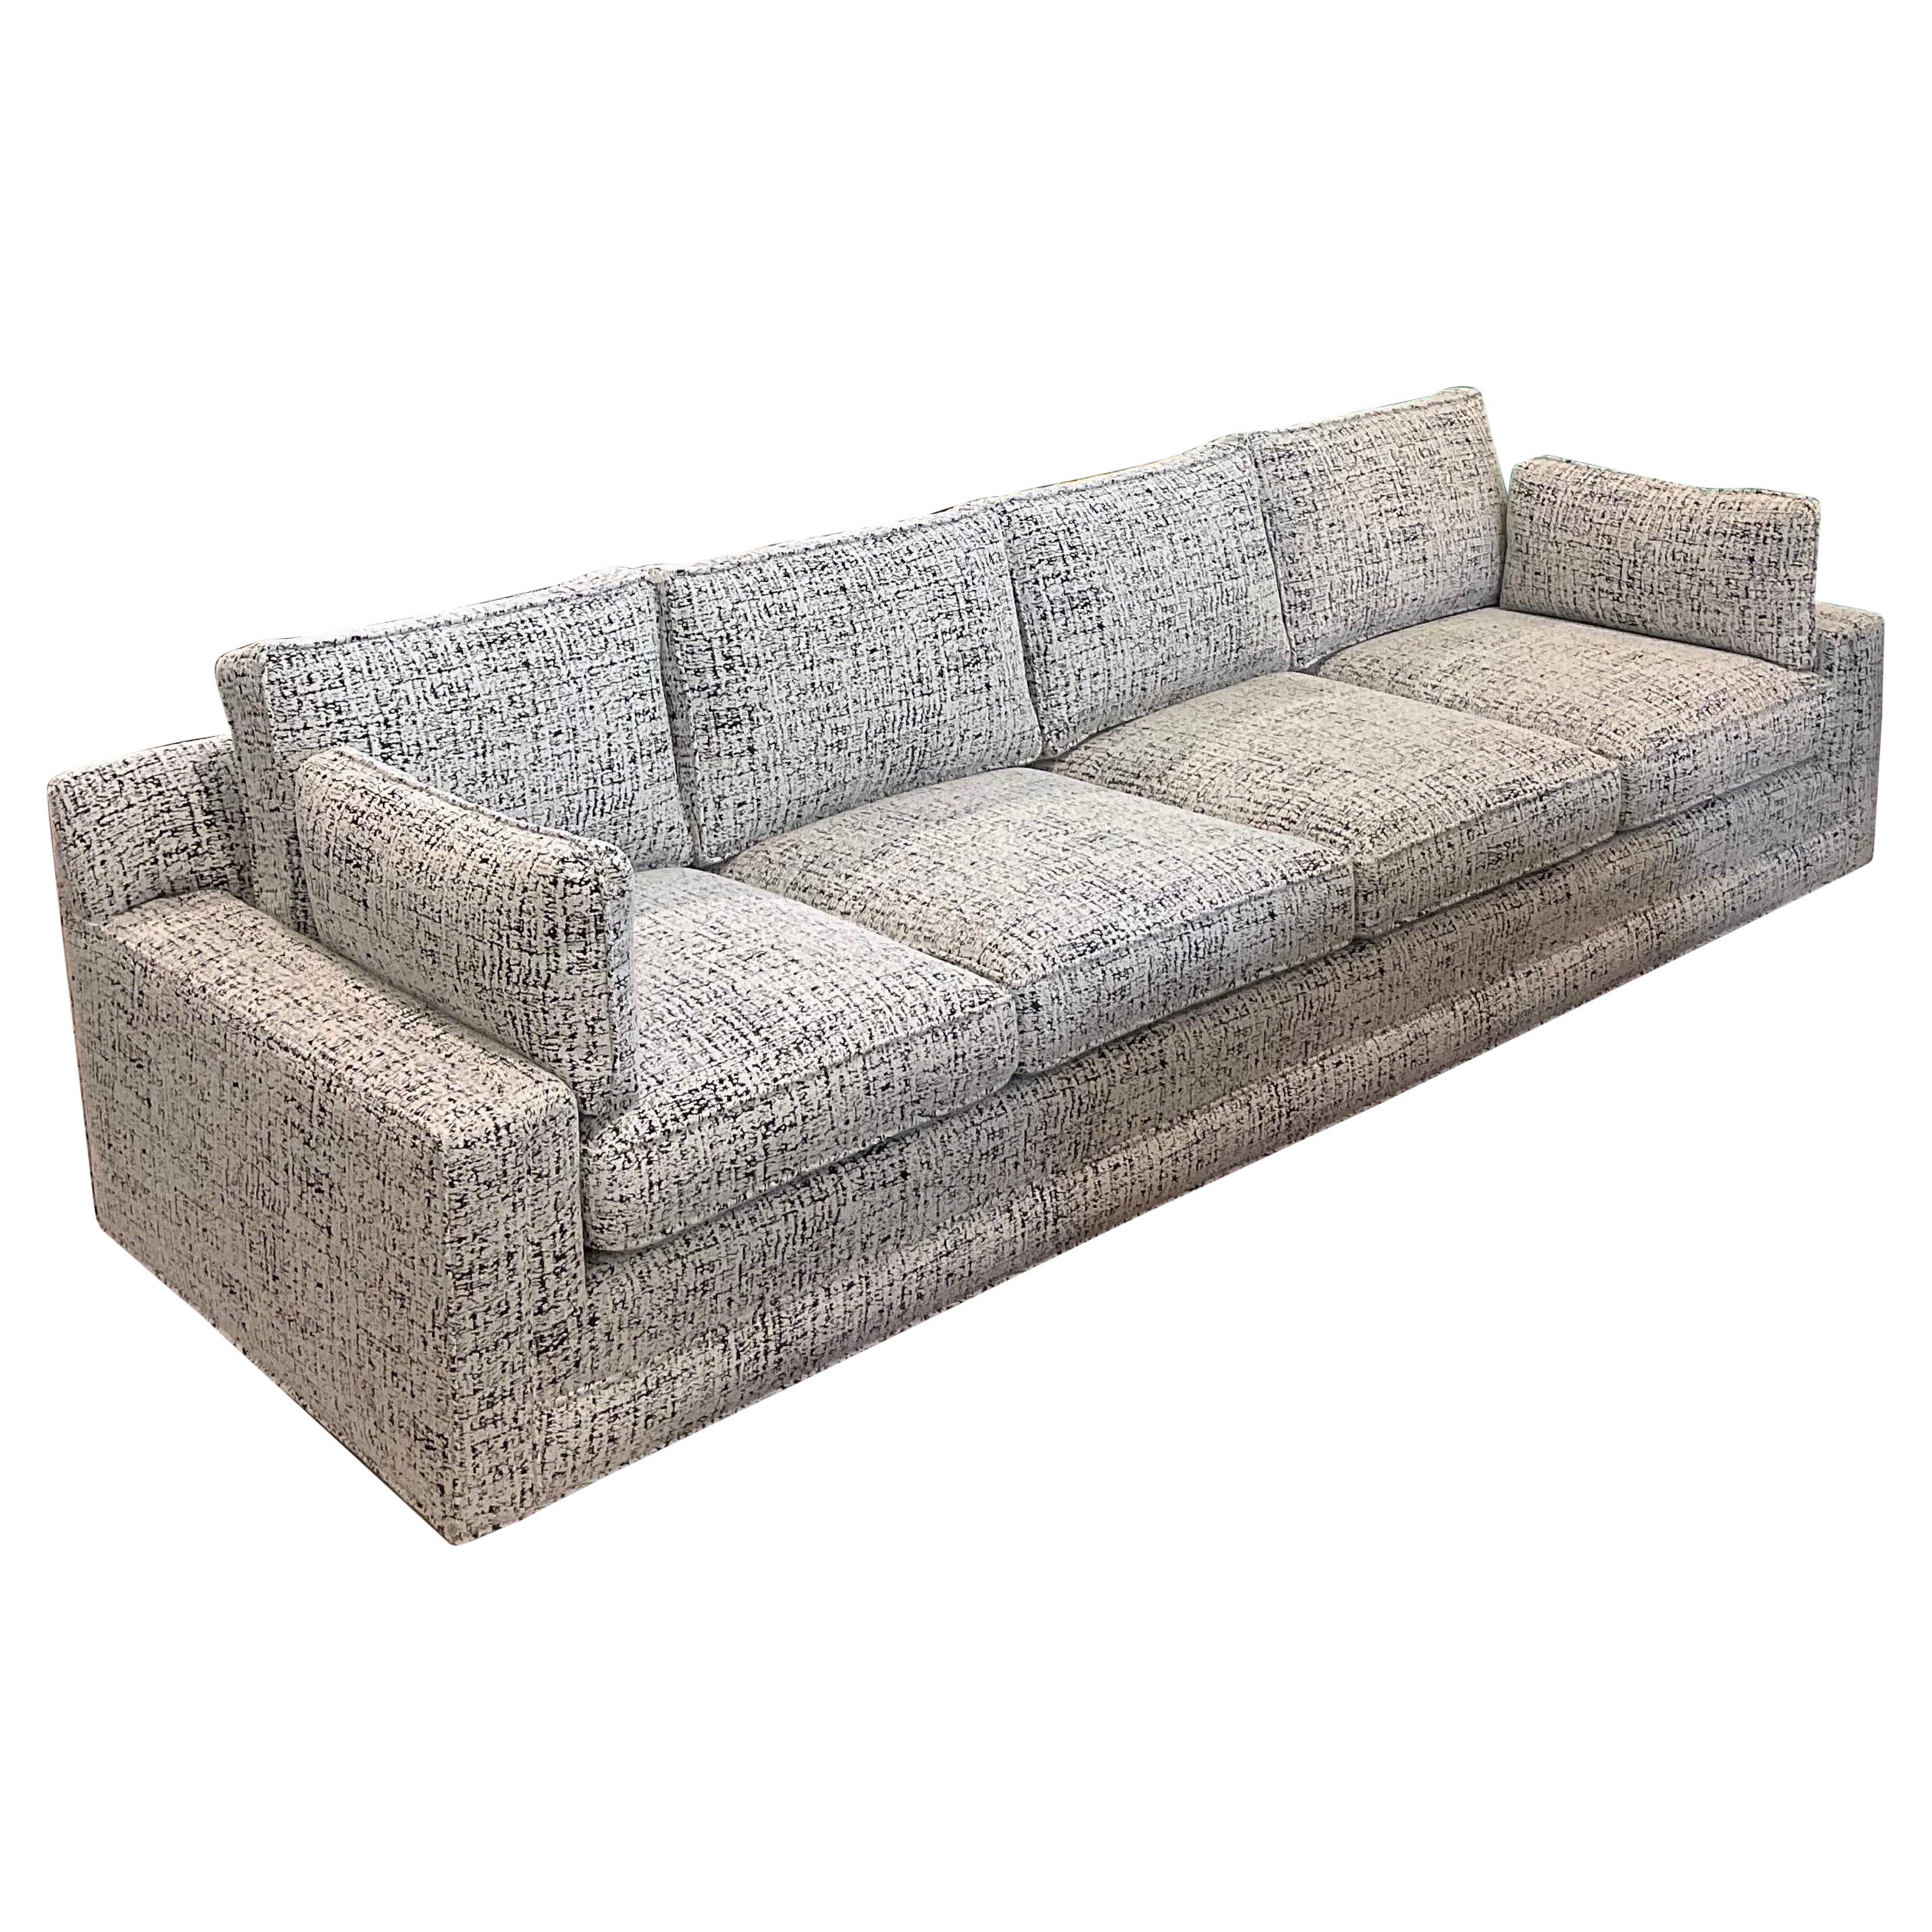 1960s Bernhardt Boucle Professionally Upholstered Sofa For Sale at 1stDibs